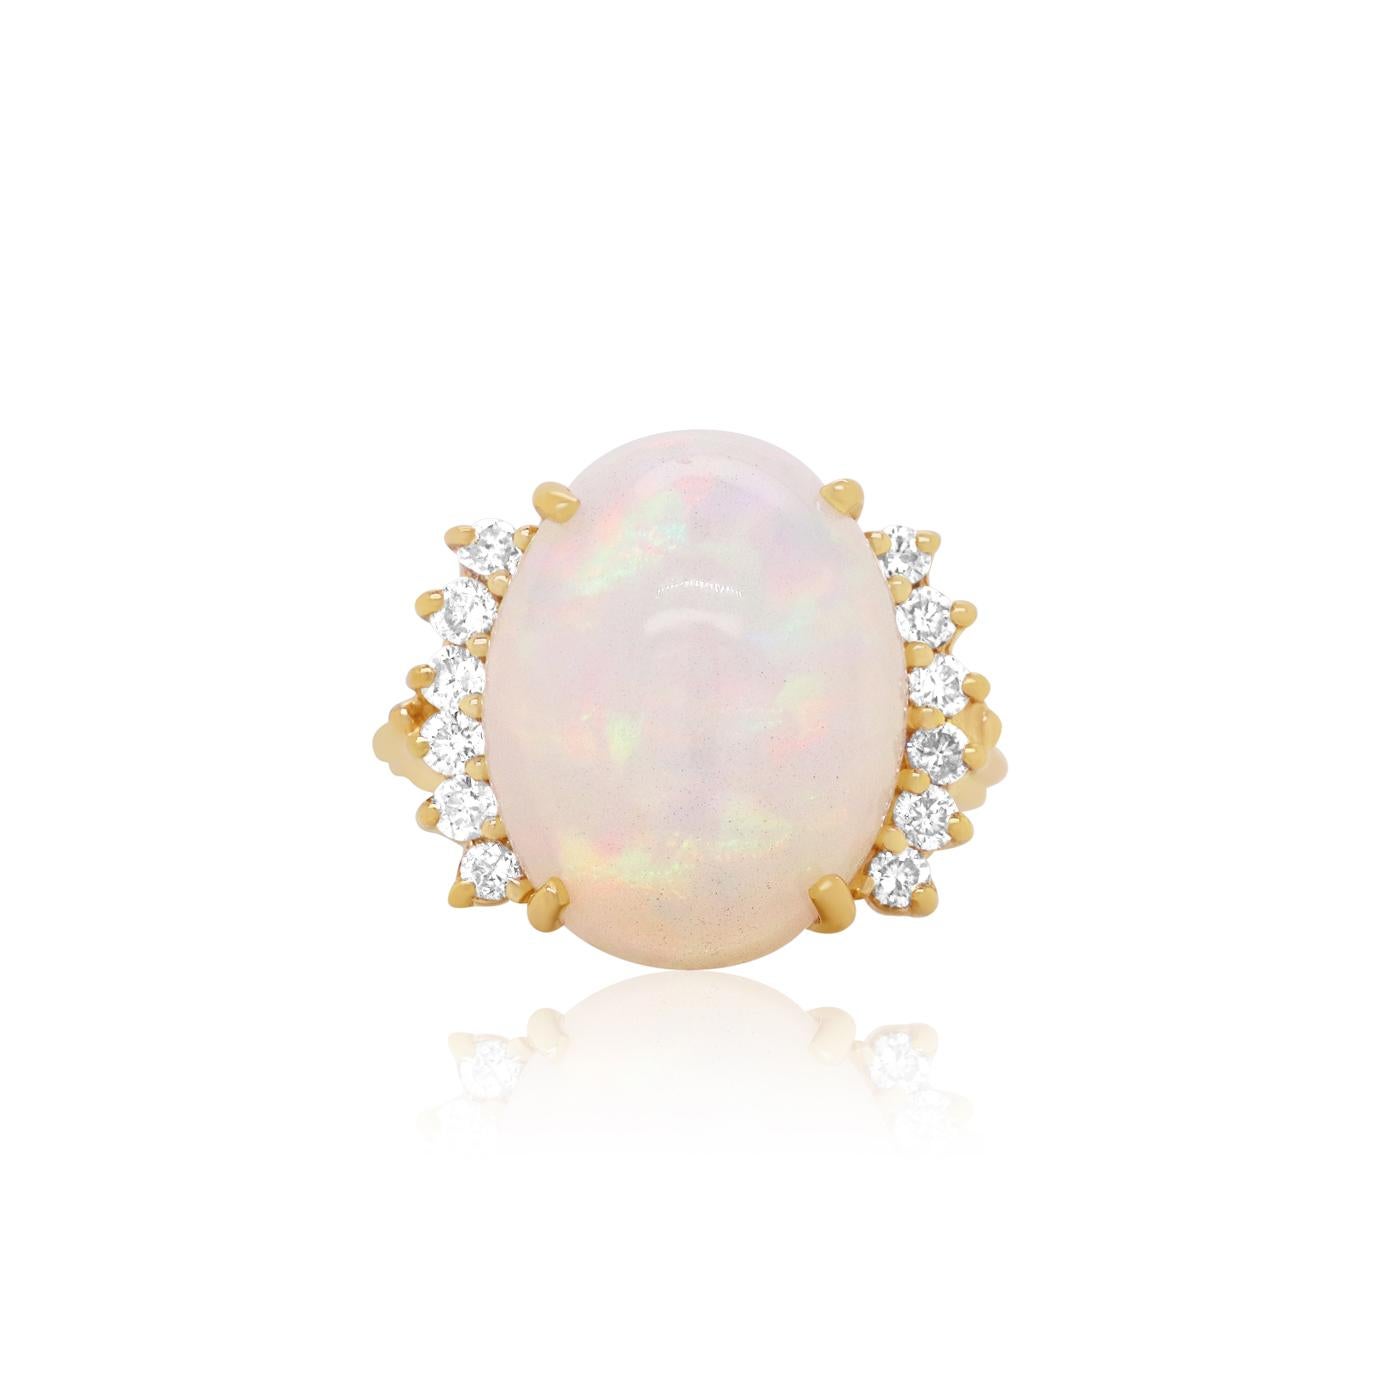 Contemporary 7.29 Carat Oval Shape Opal Round Accenting Diamonds Fashion Ring 14k Yellow Gold